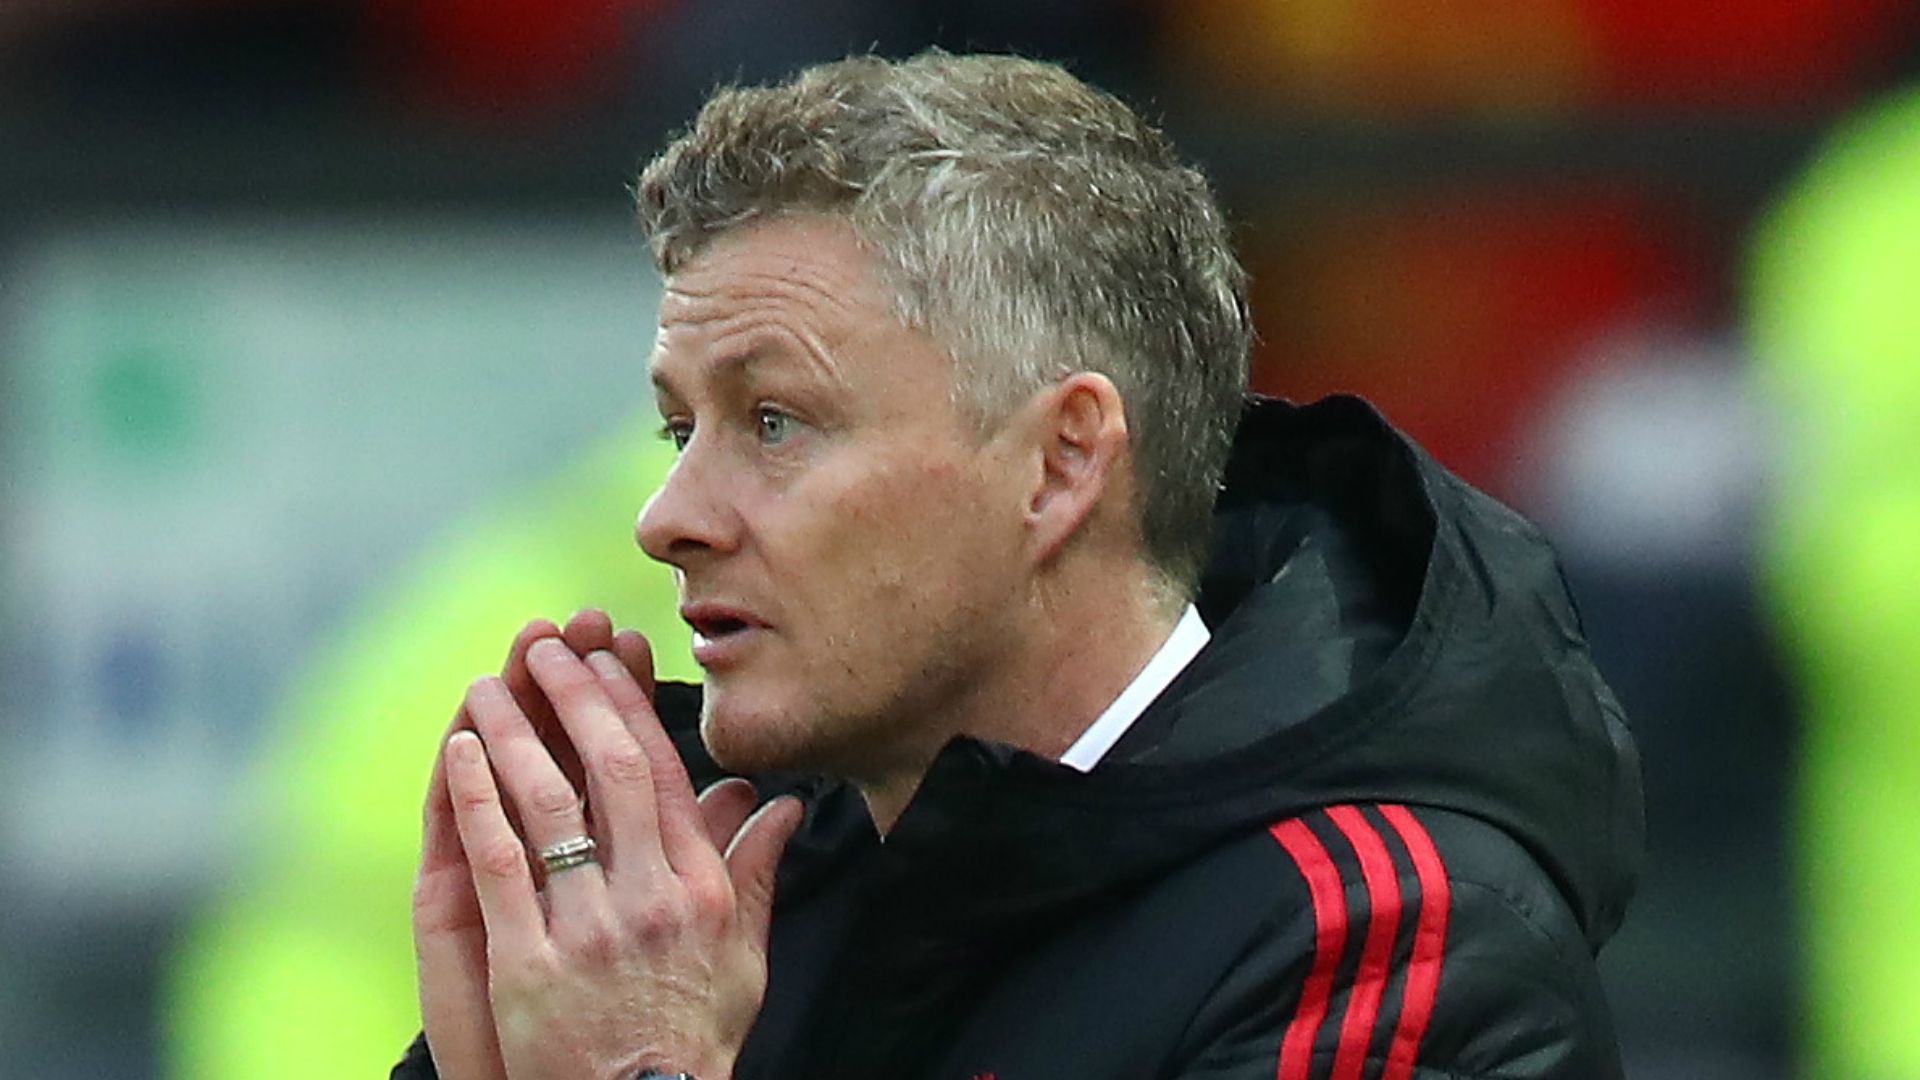 Manchester United board call emergency meeting to discuss Ole Gunnar Solskjaer’s future as manager | Manchester United